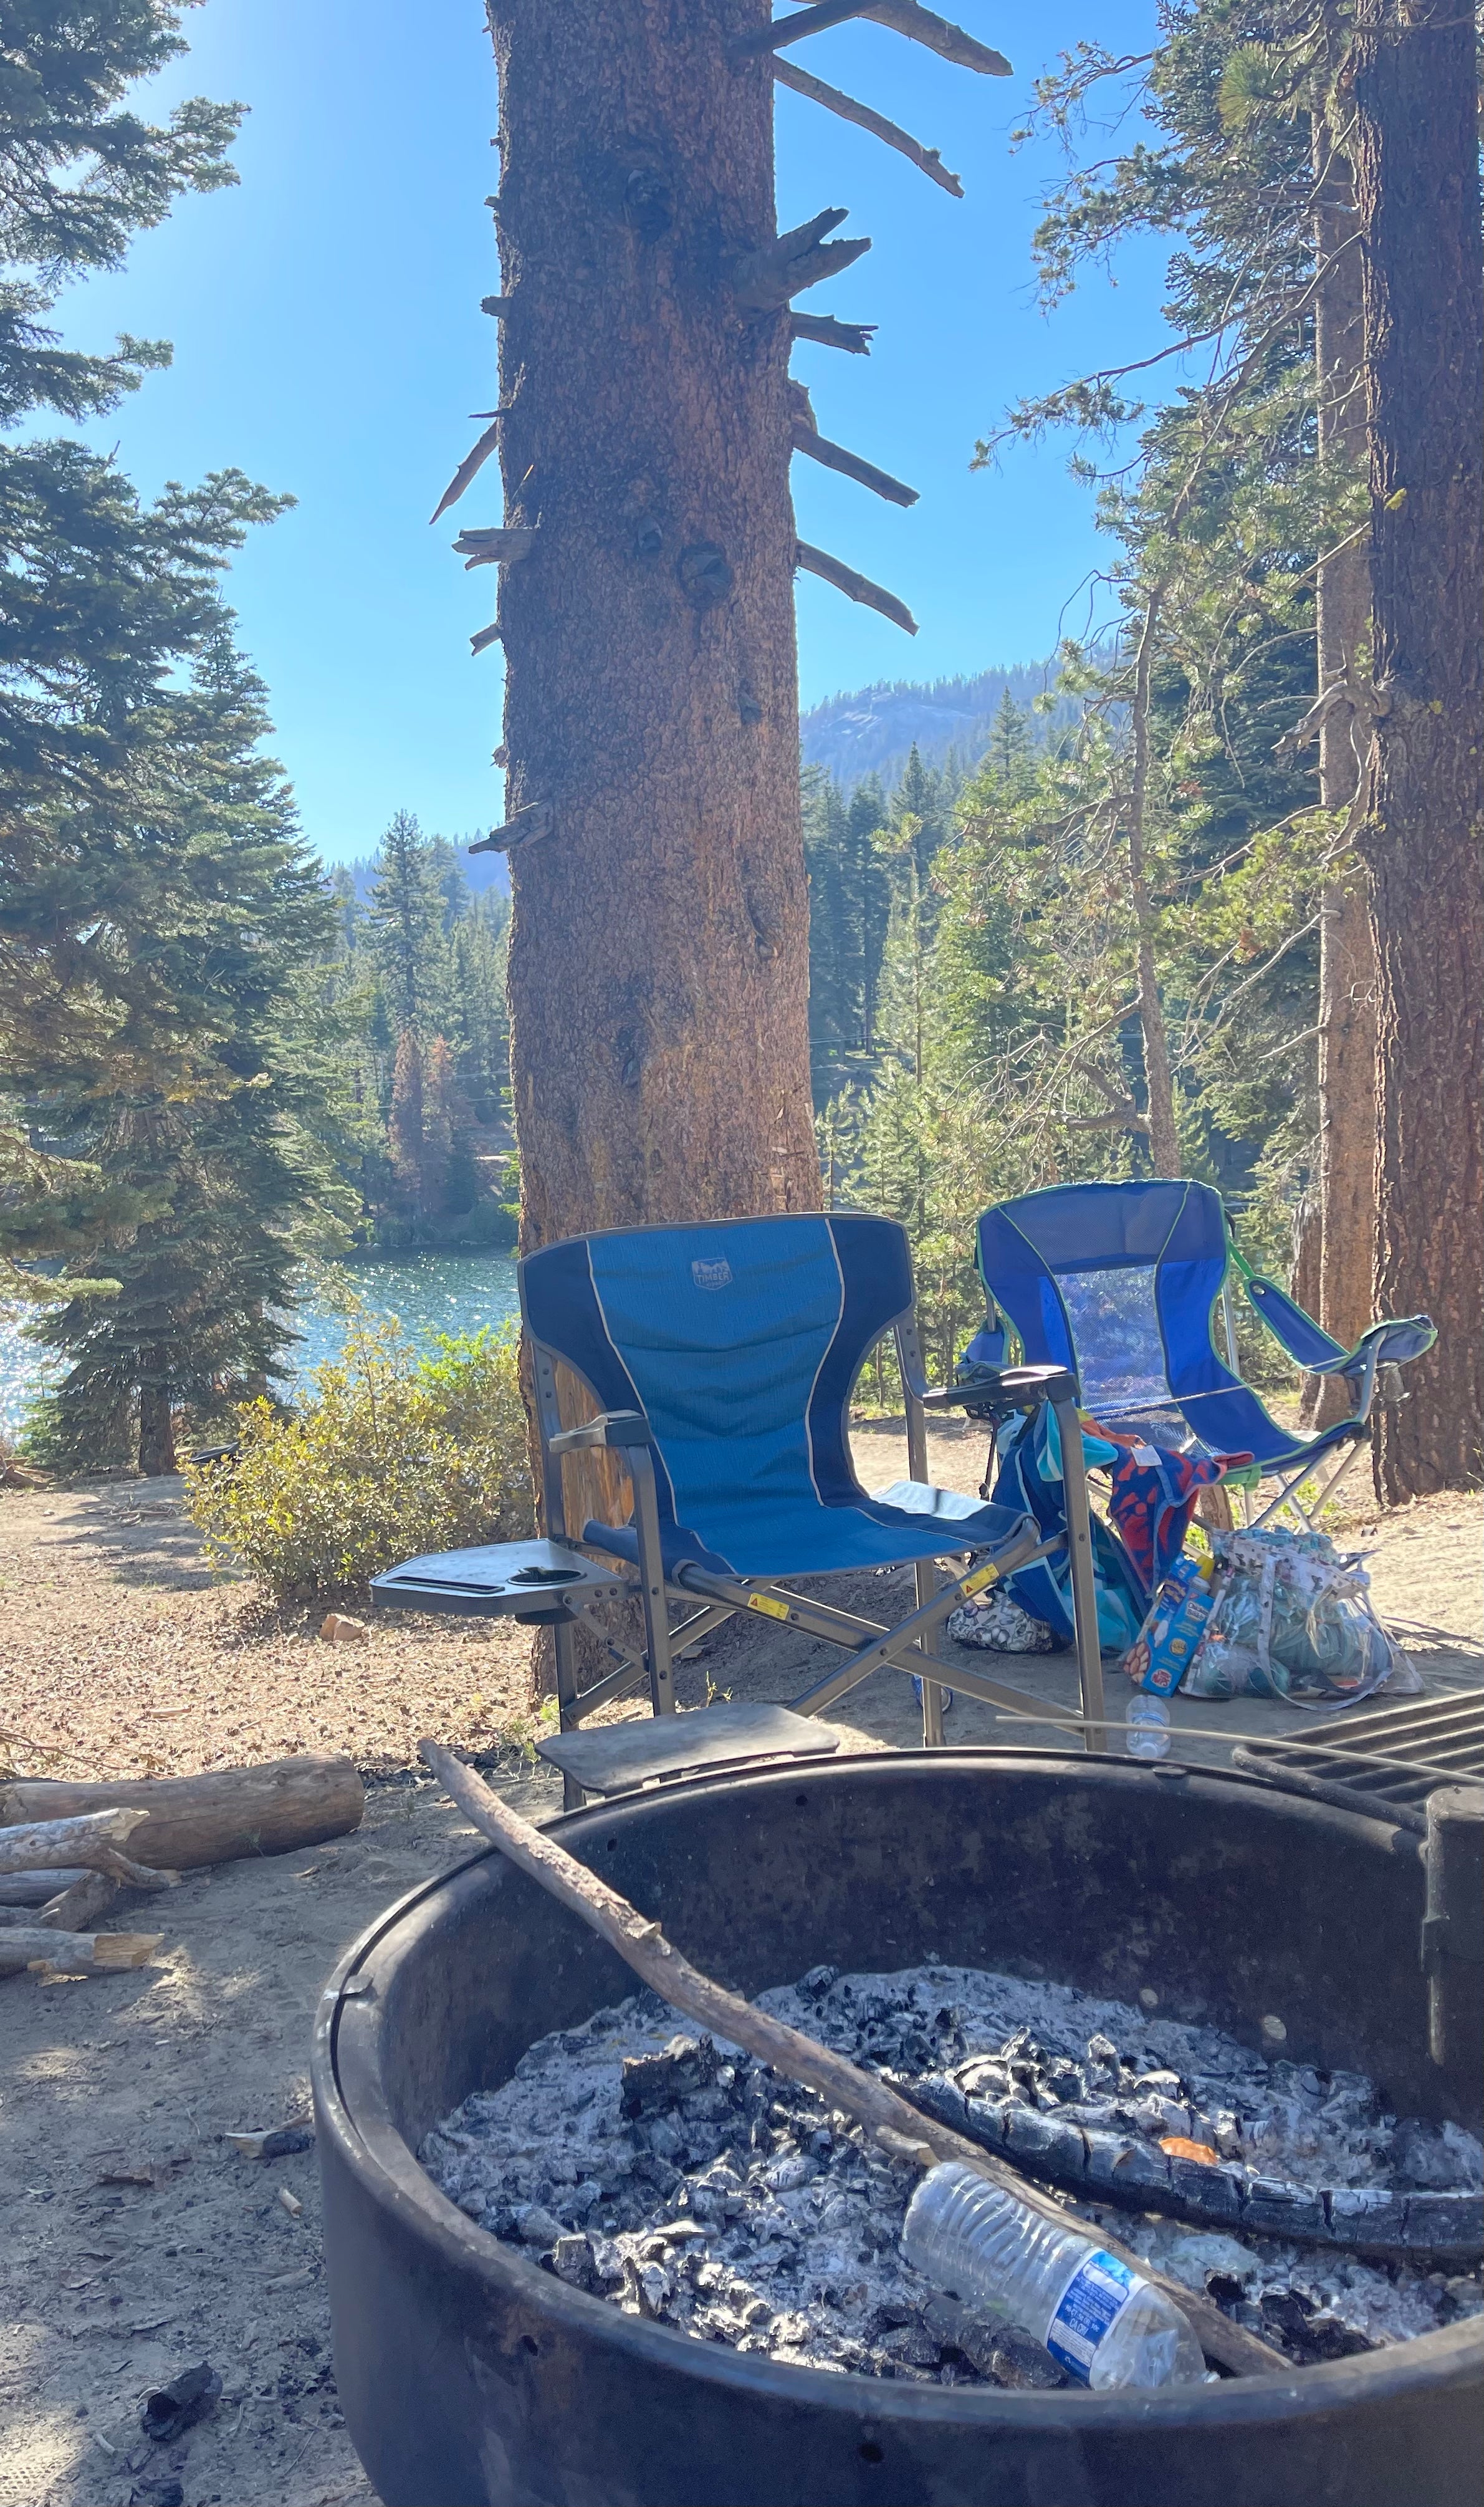 Camper submitted image from Sno-Park Huntington Lake Parking - 4